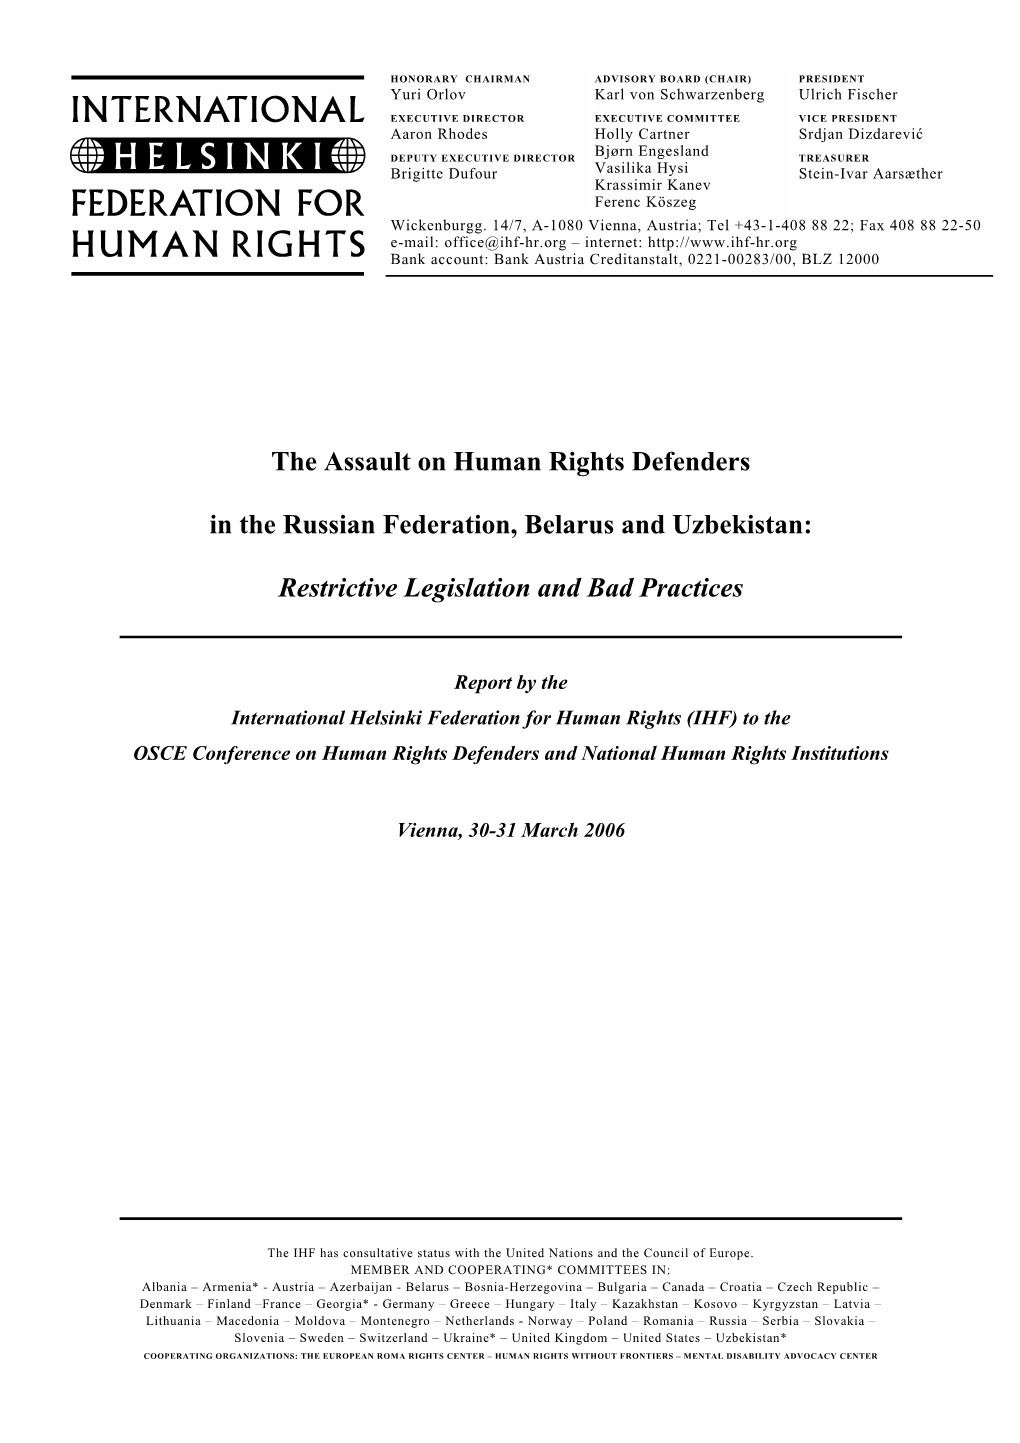 The Assault on Human Rights Defenders in the Russian